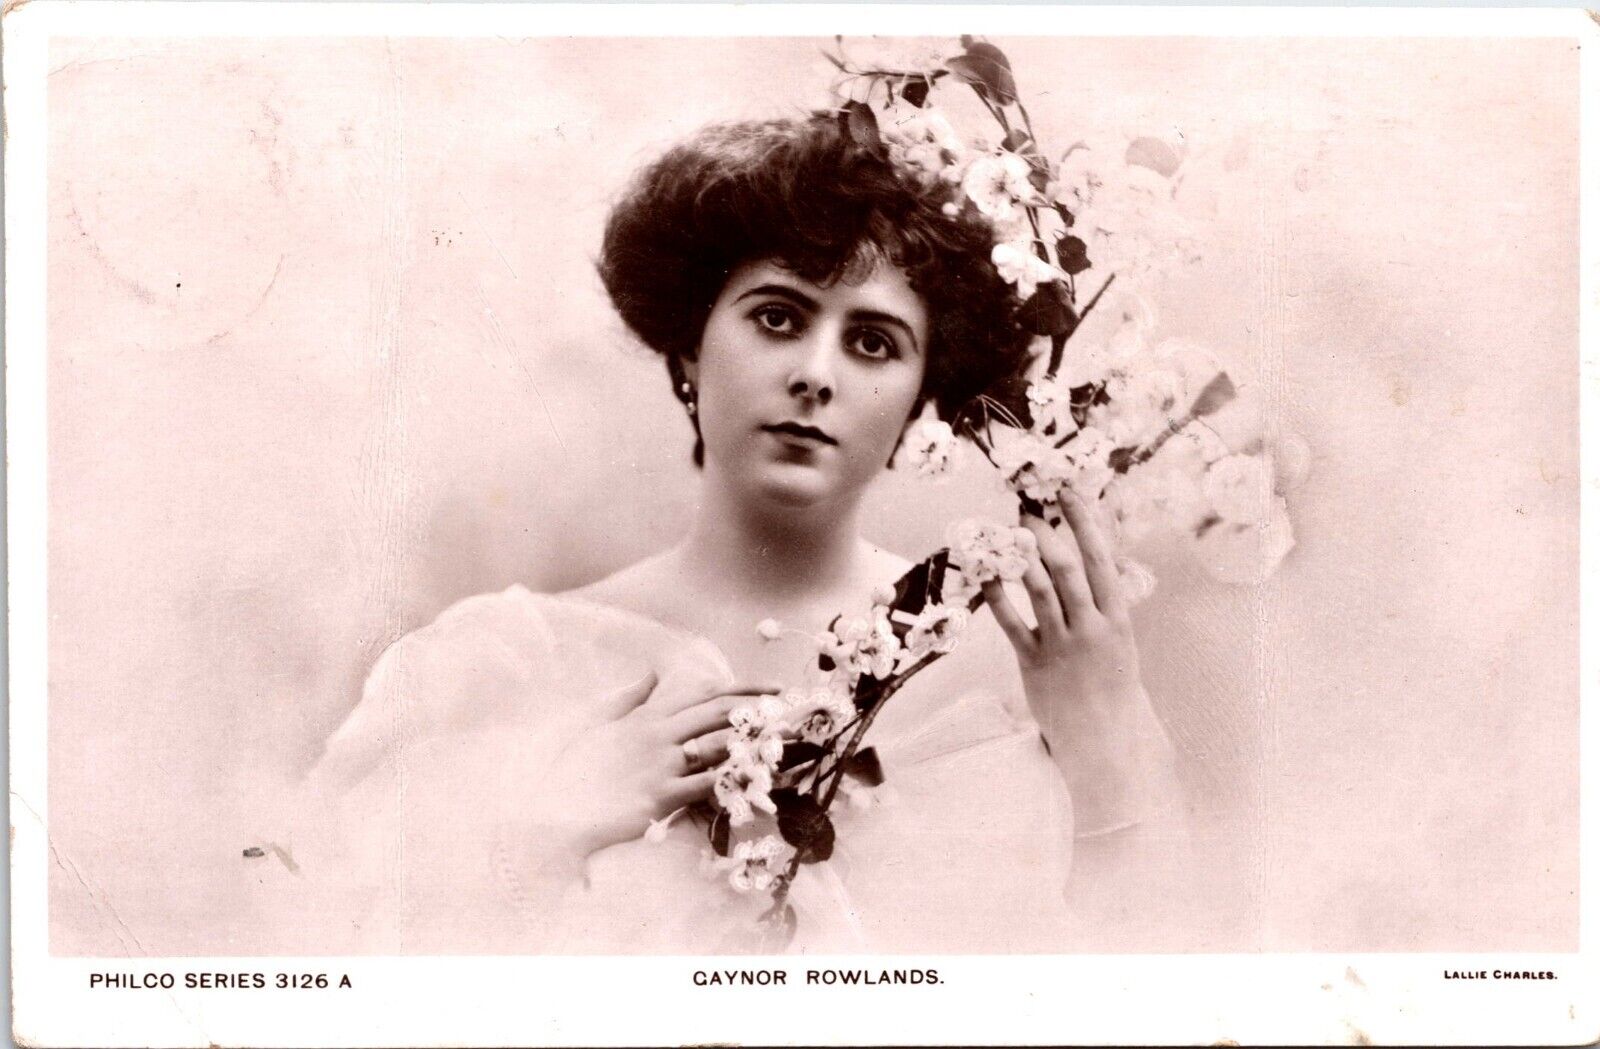 GAYNOR ROWLANDS : ENGLISH STAGE ACTRESS; SINGER AND DANCER : BY LALLIE CHARLES